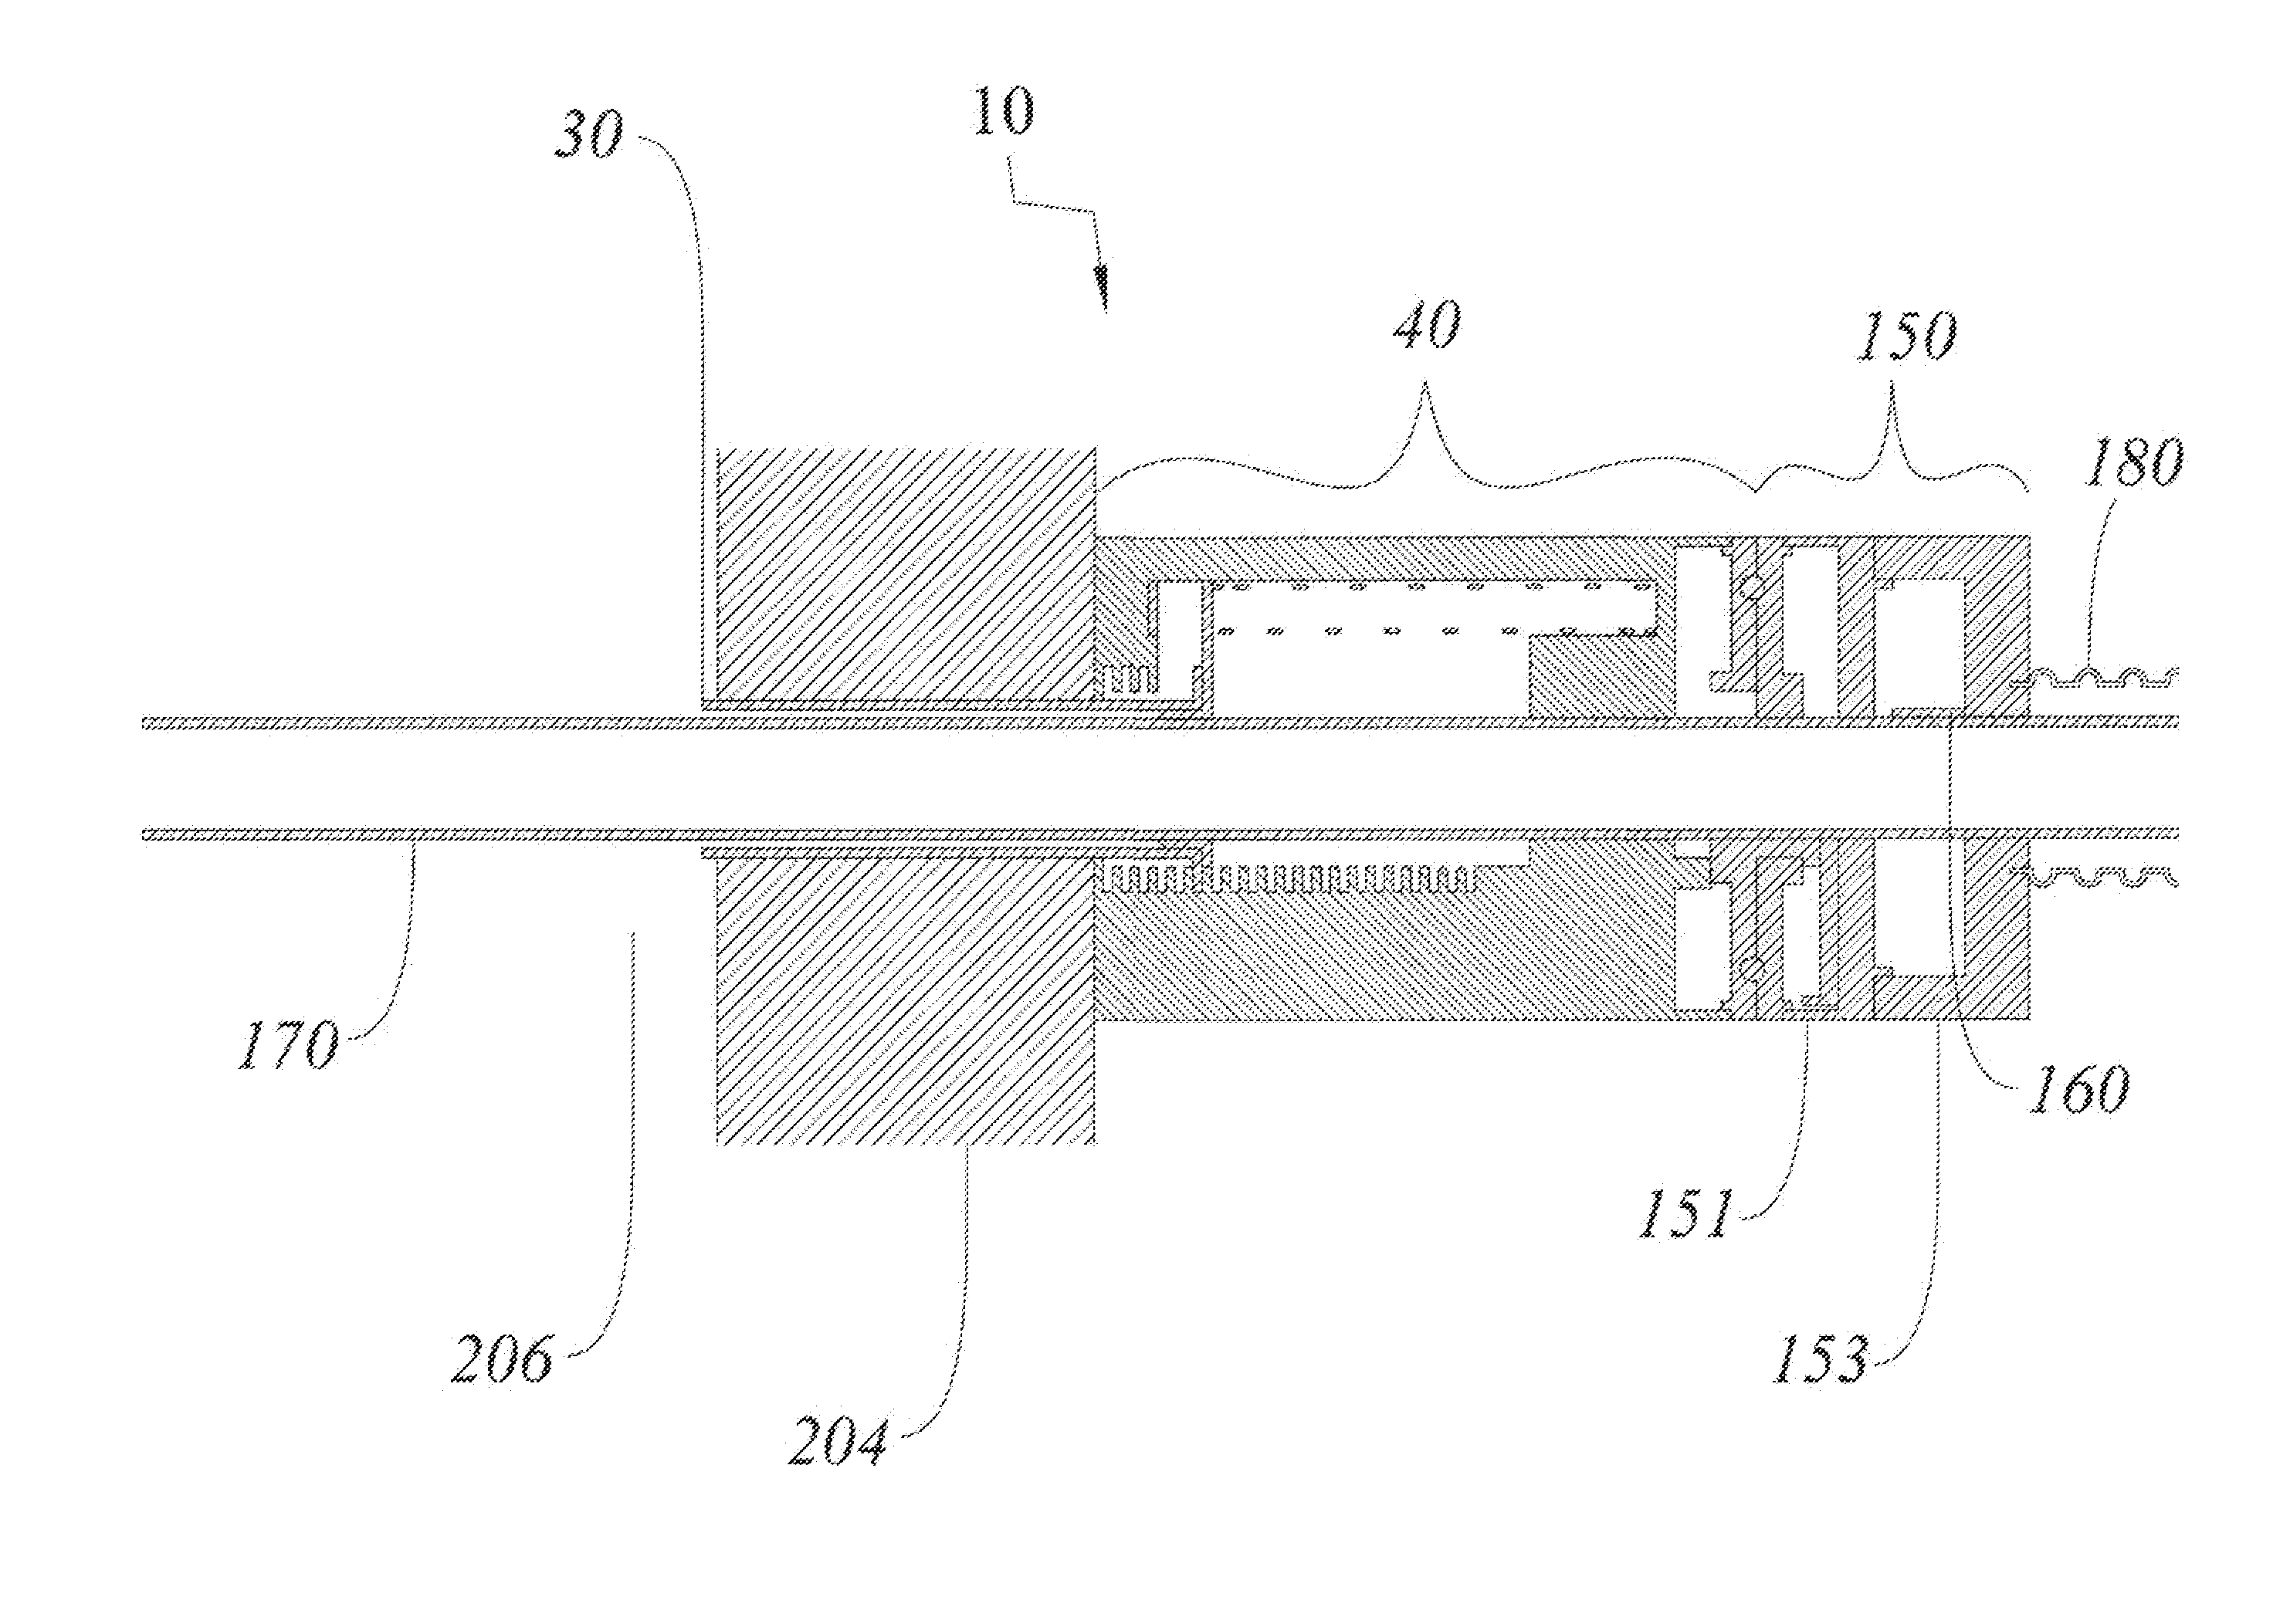 Percutaneous access pathway system and method